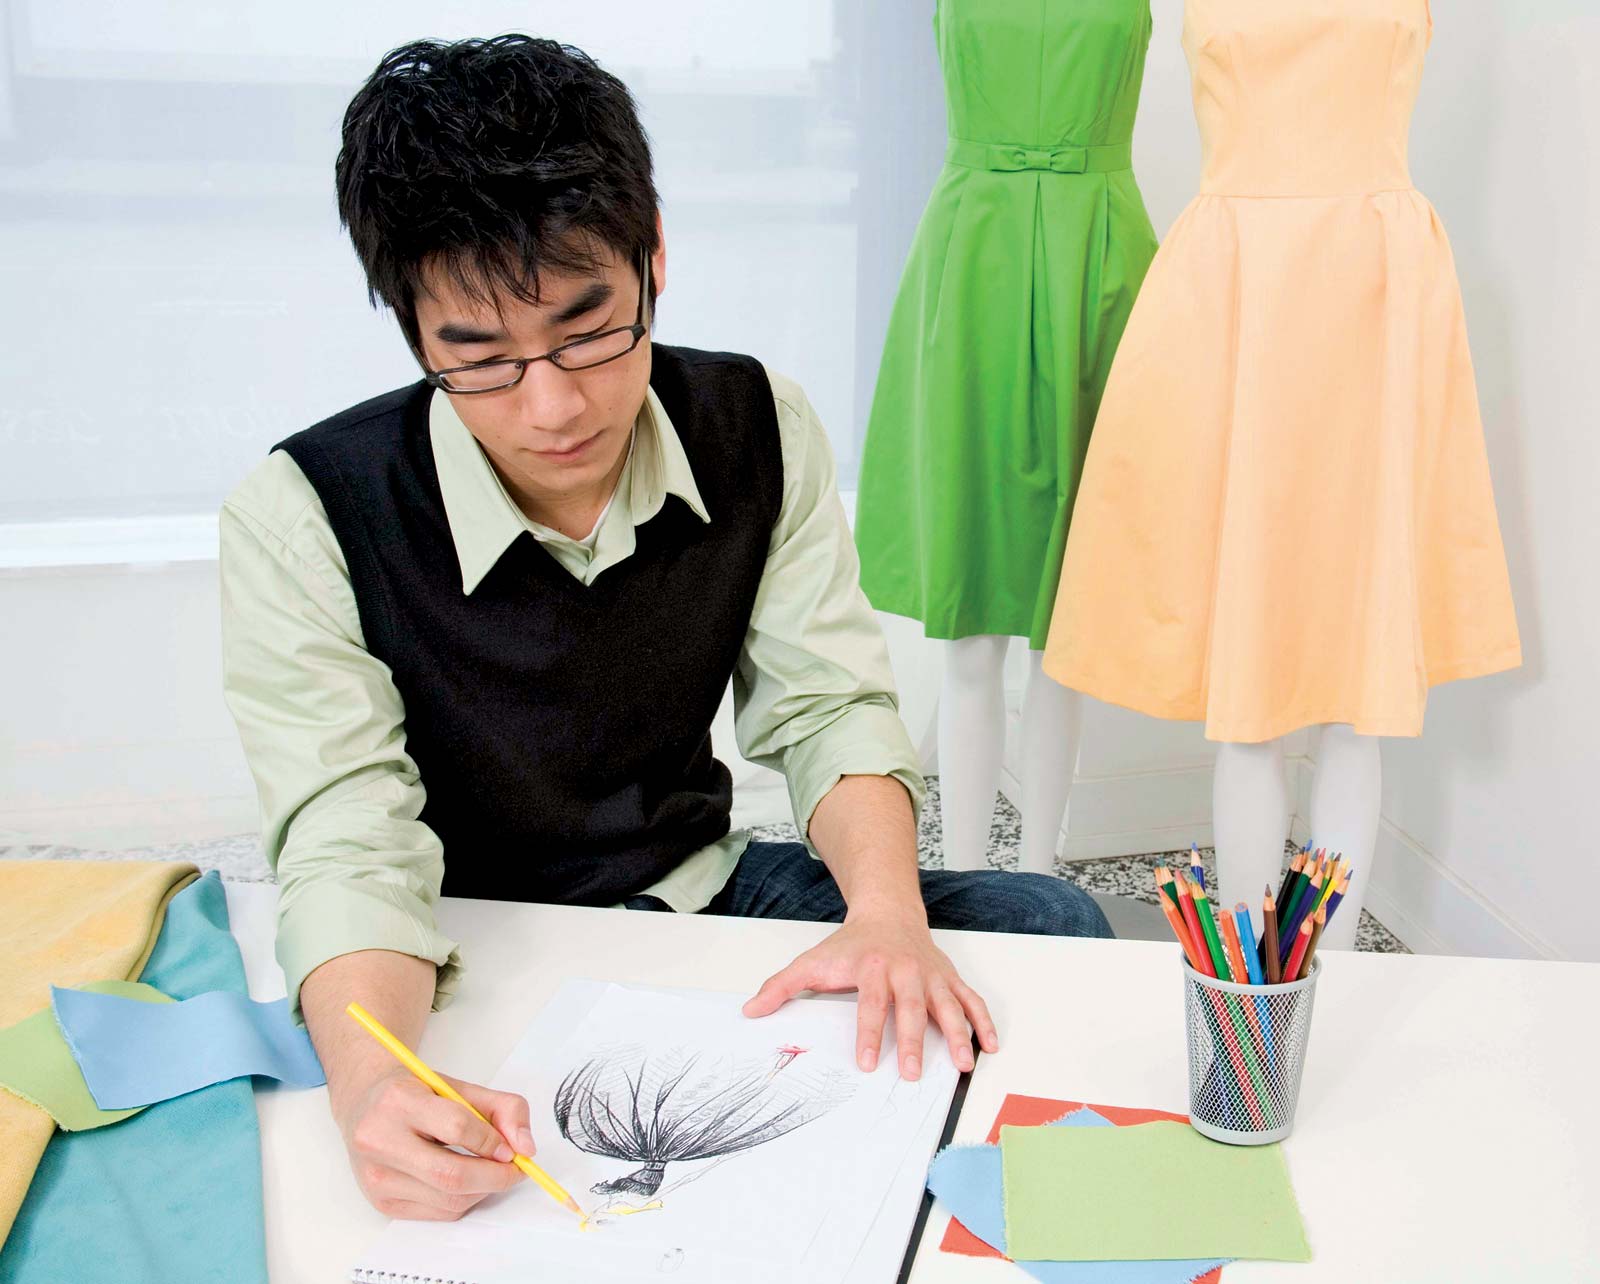 HOW TO BECOME PROFESSIONAL FASHION DESIGNER: